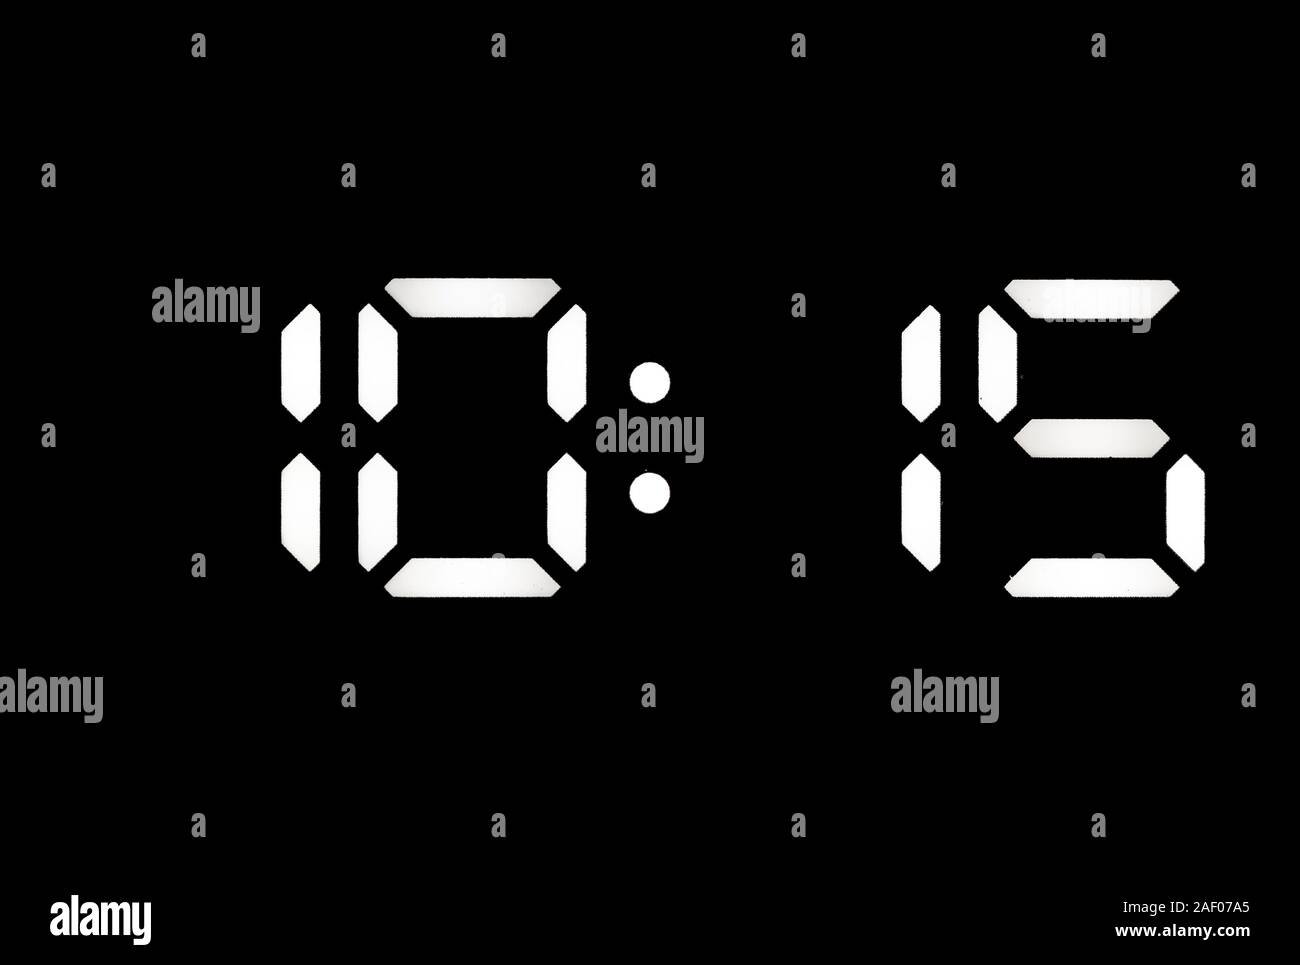 Real white led digital clock on a black background showing time 10:15 Stock Photo